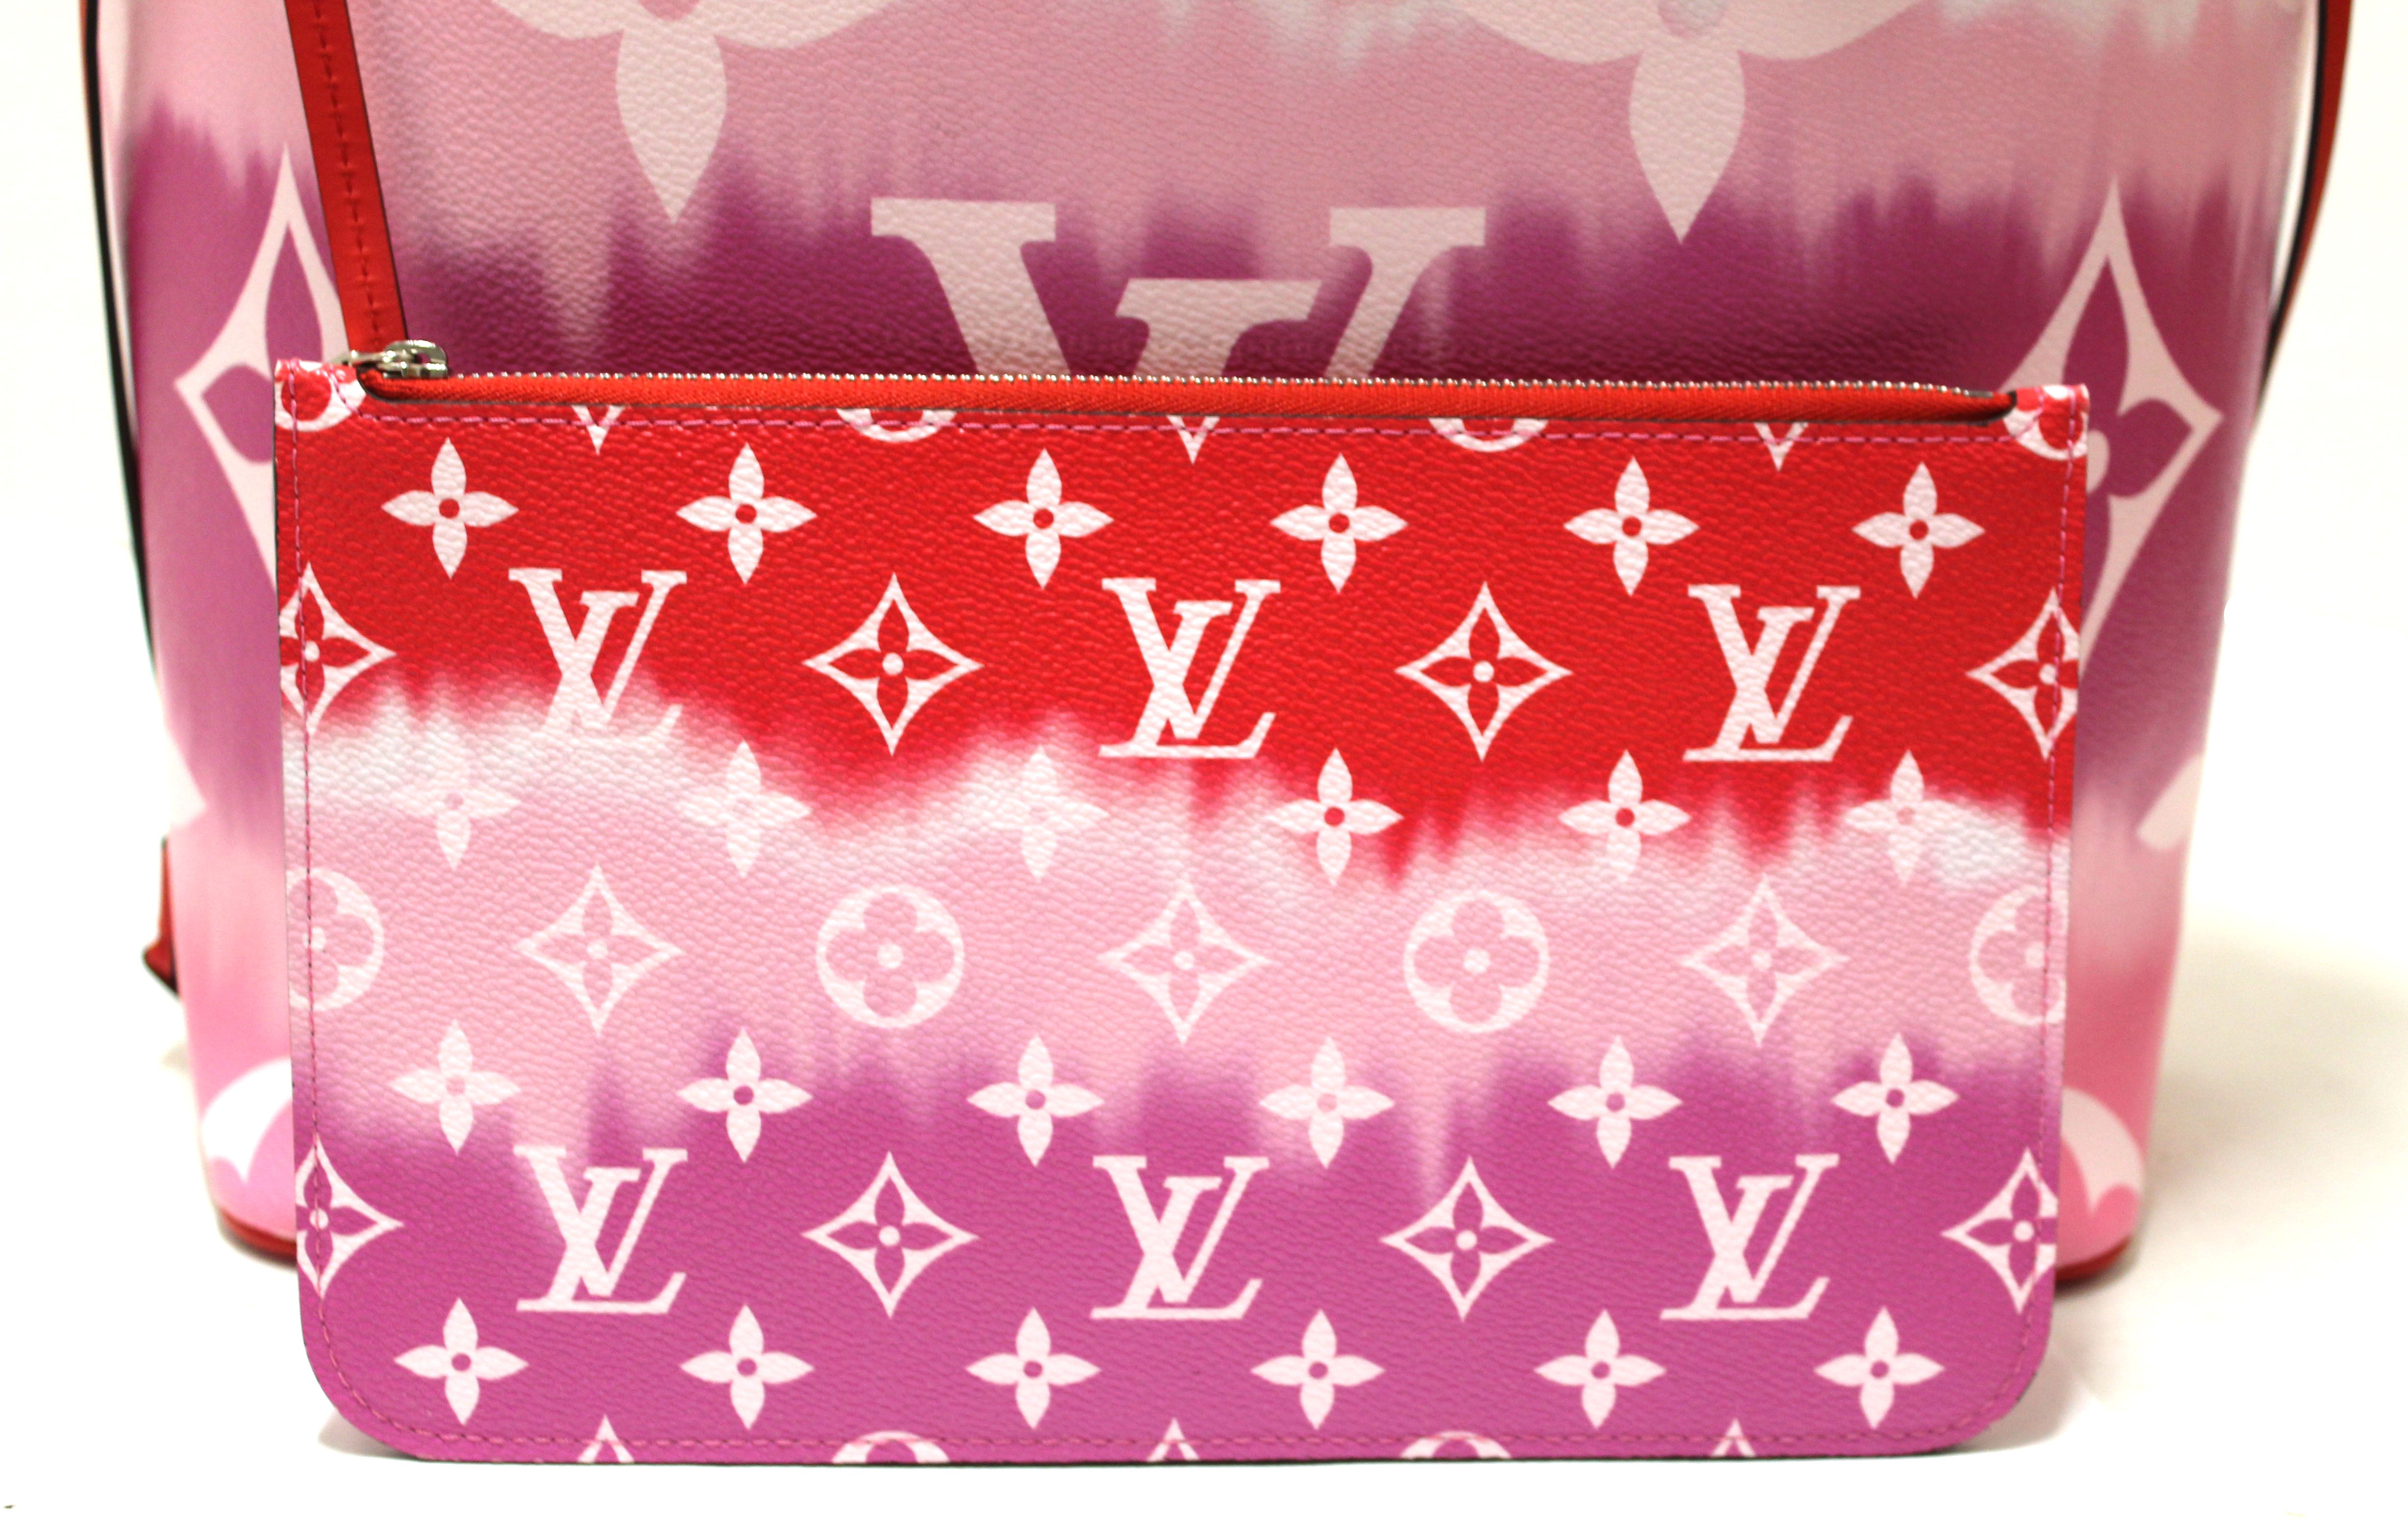 red and pink louis vuittons handbags